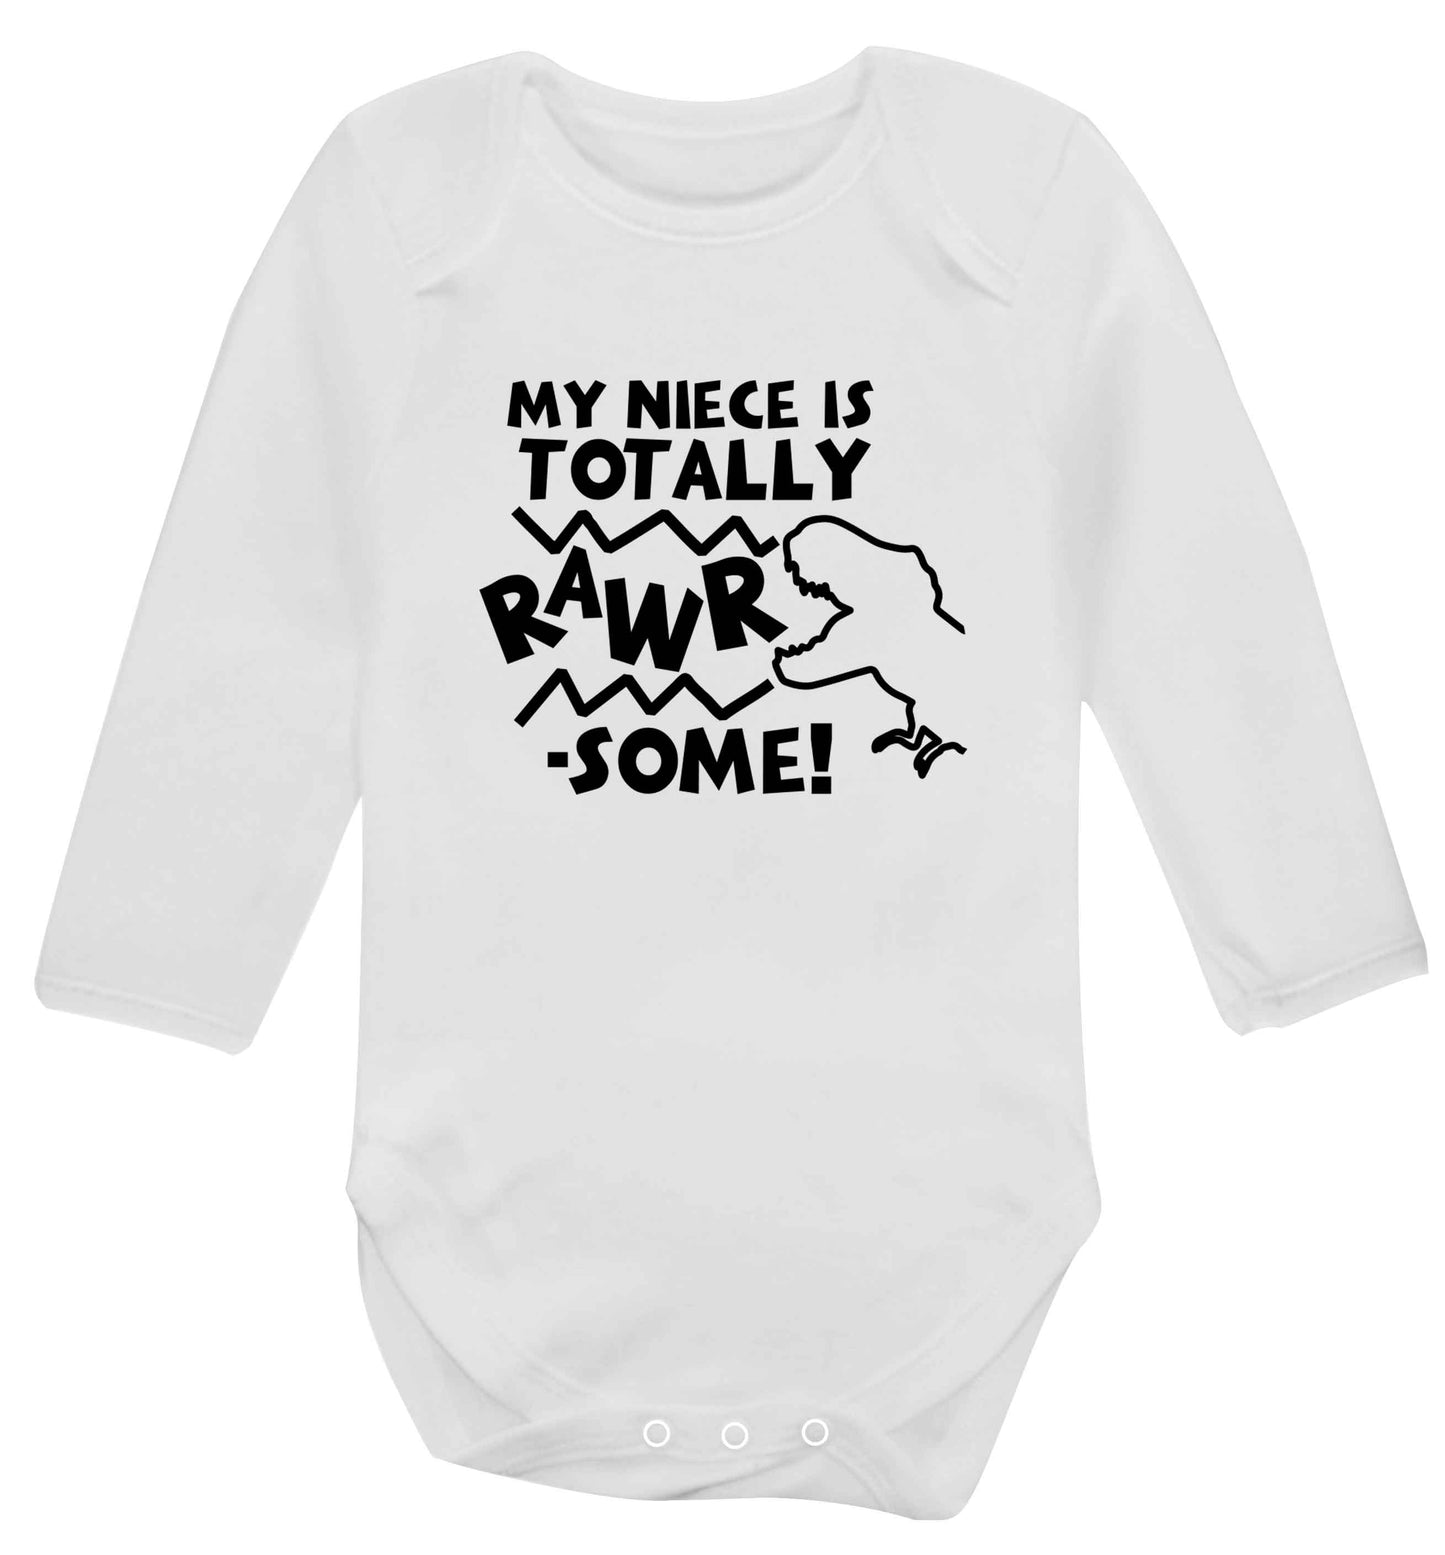 My niece is totally rawrsome baby vest long sleeved white 6-12 months